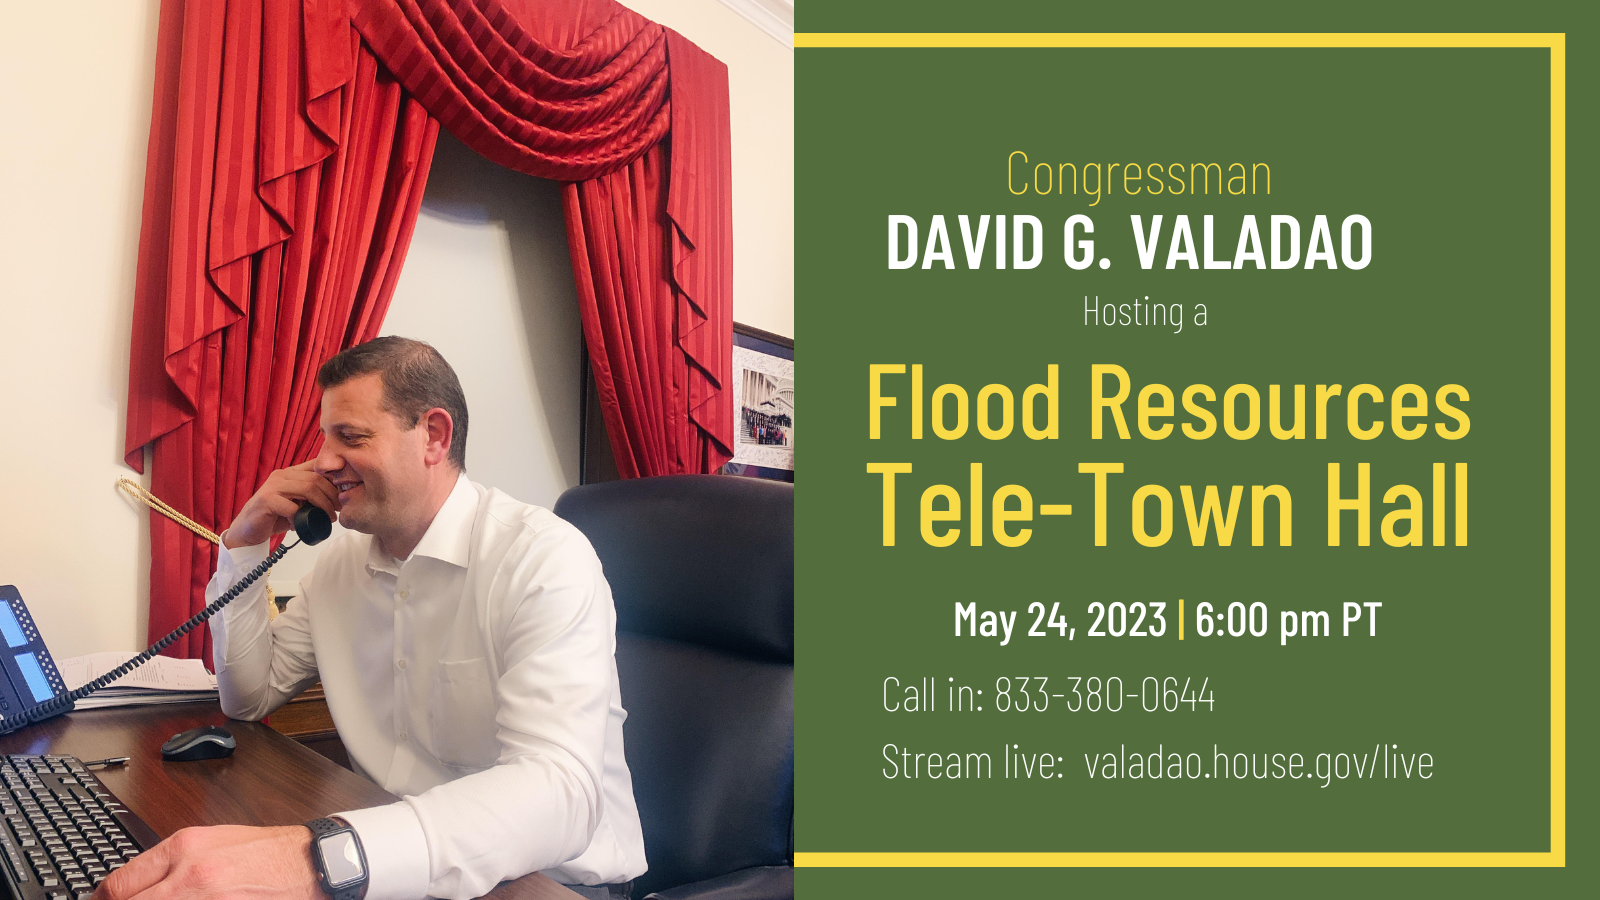 Sign up for our Flood Resources Tele-Town Hall